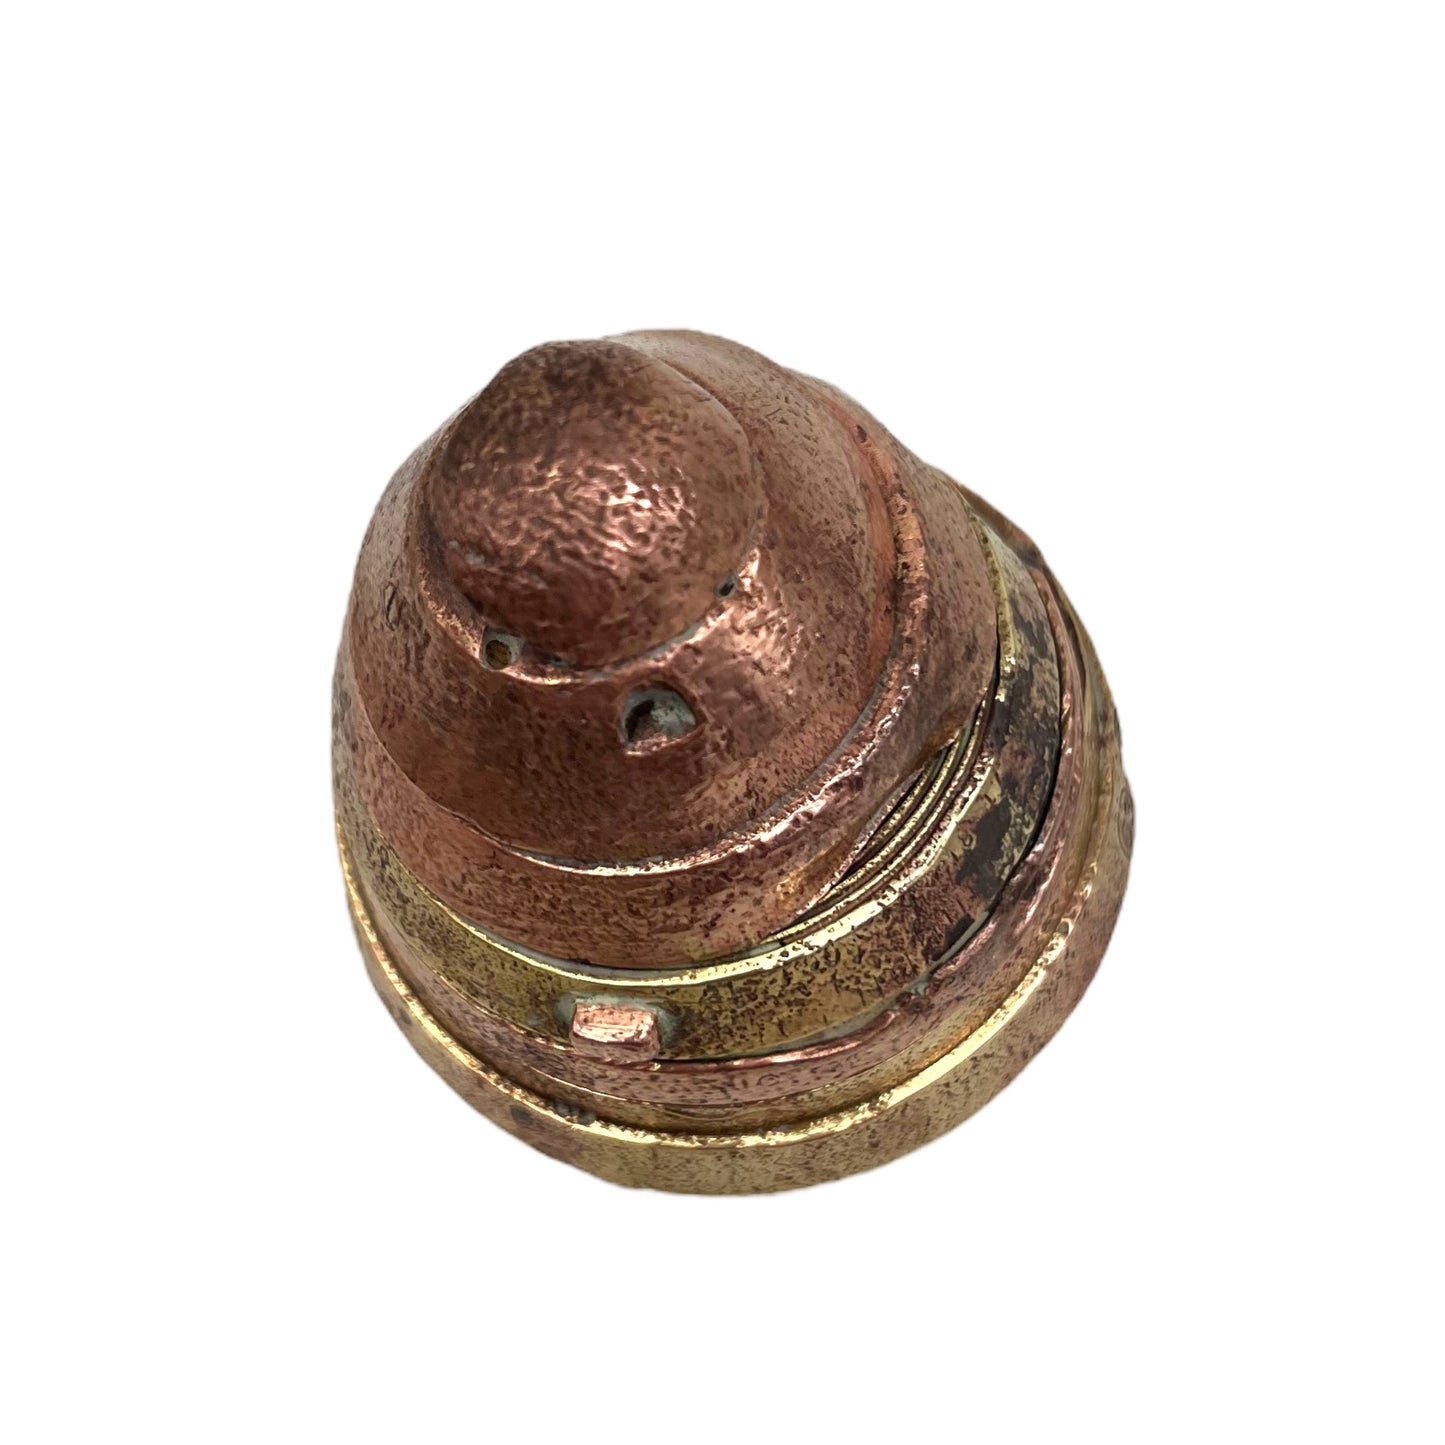 British WW1 brass fuse ideal as a paperweight